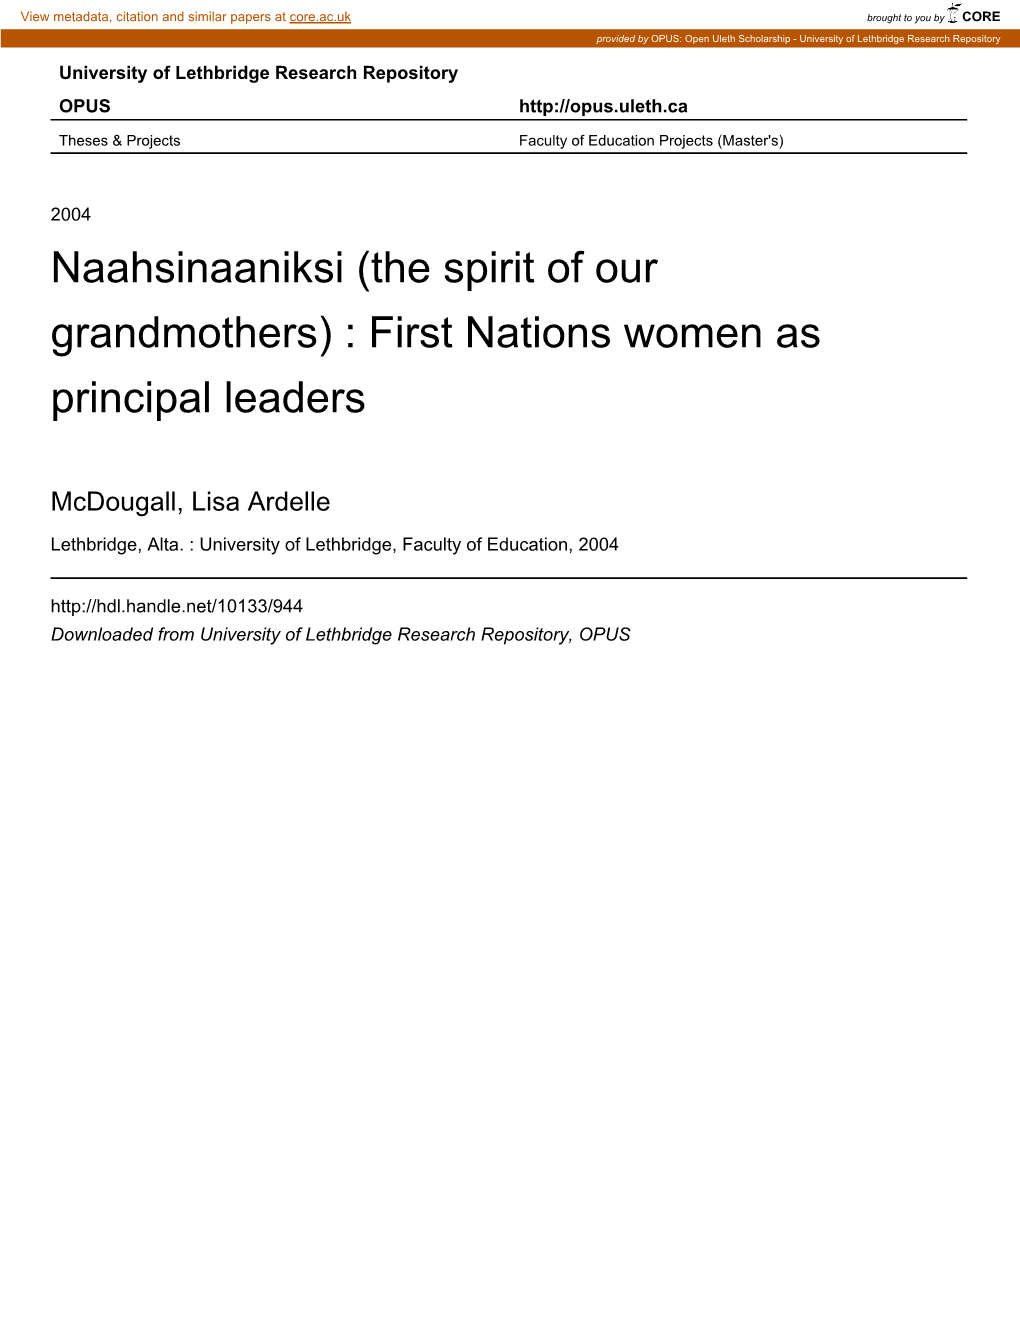 First Nations Women As Principal Leaders